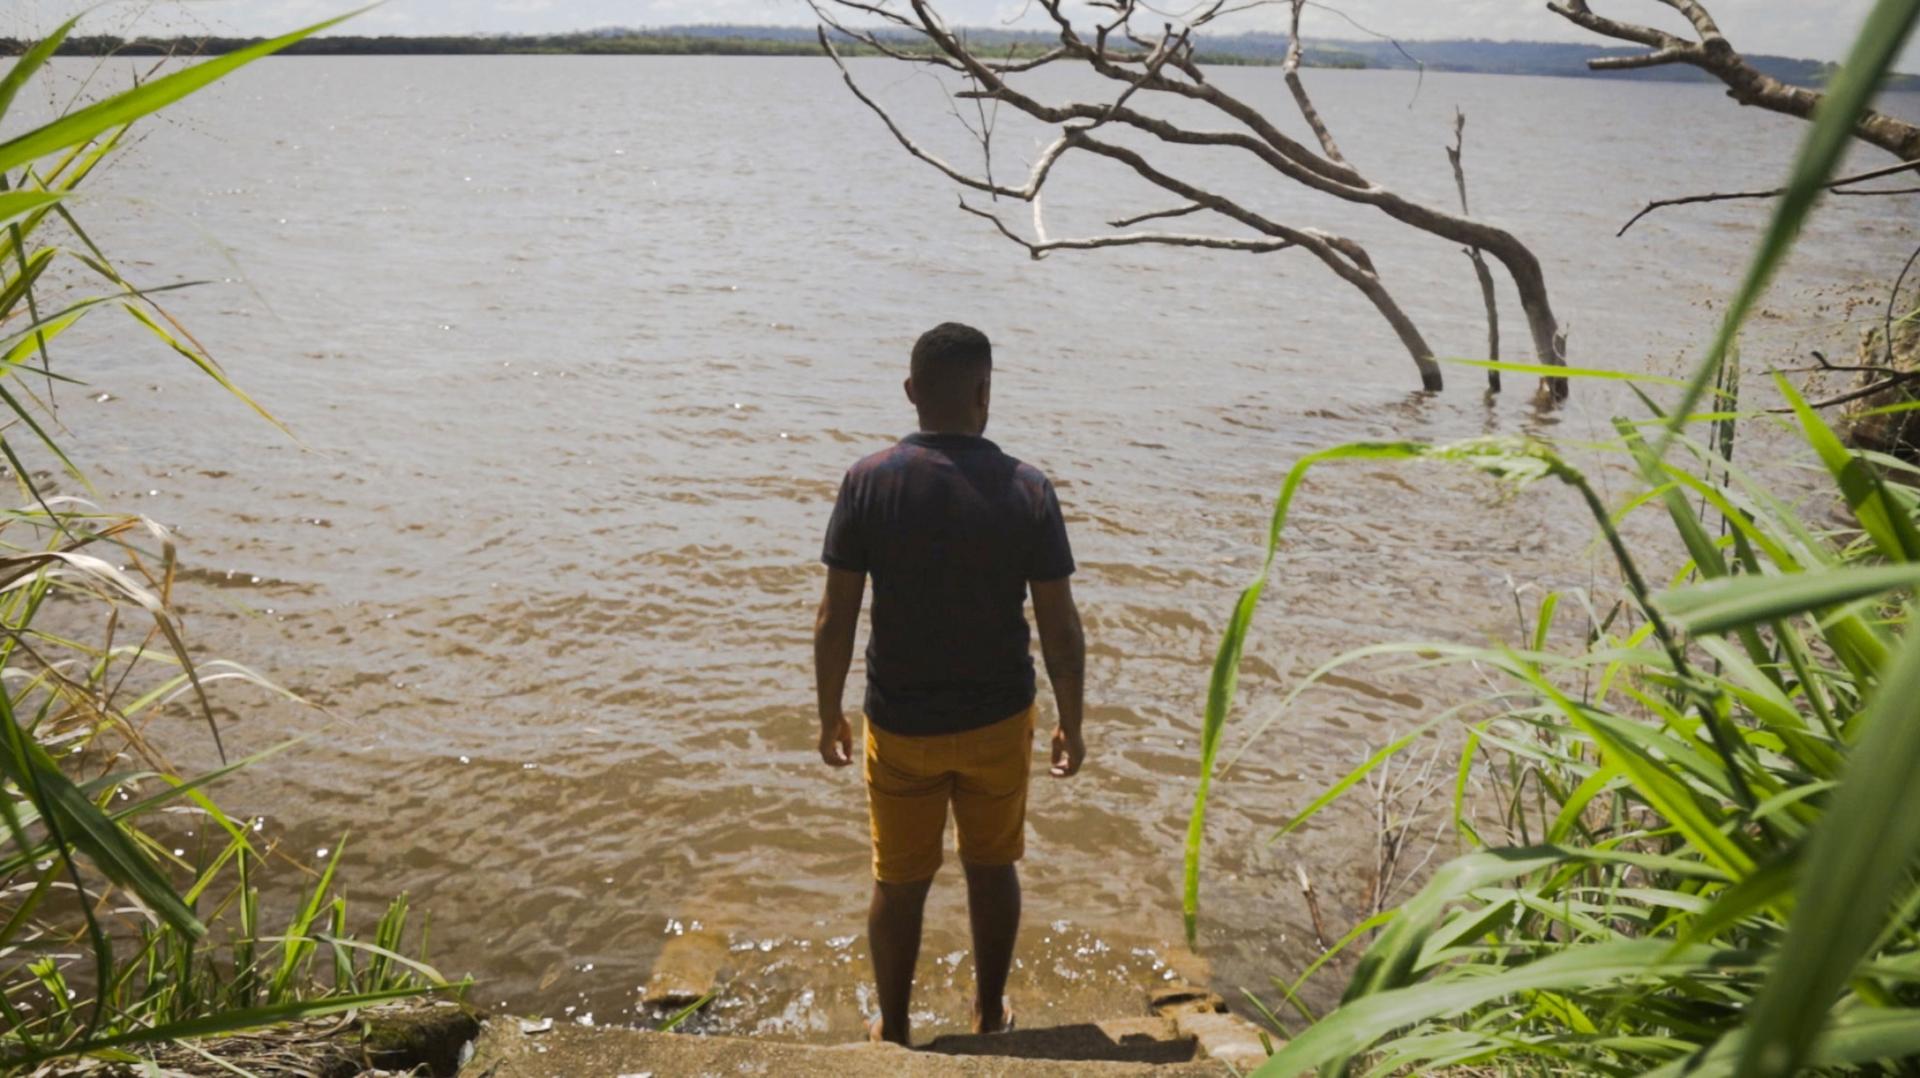 Cleyson Juruna stands at the edge of the Xingu river.